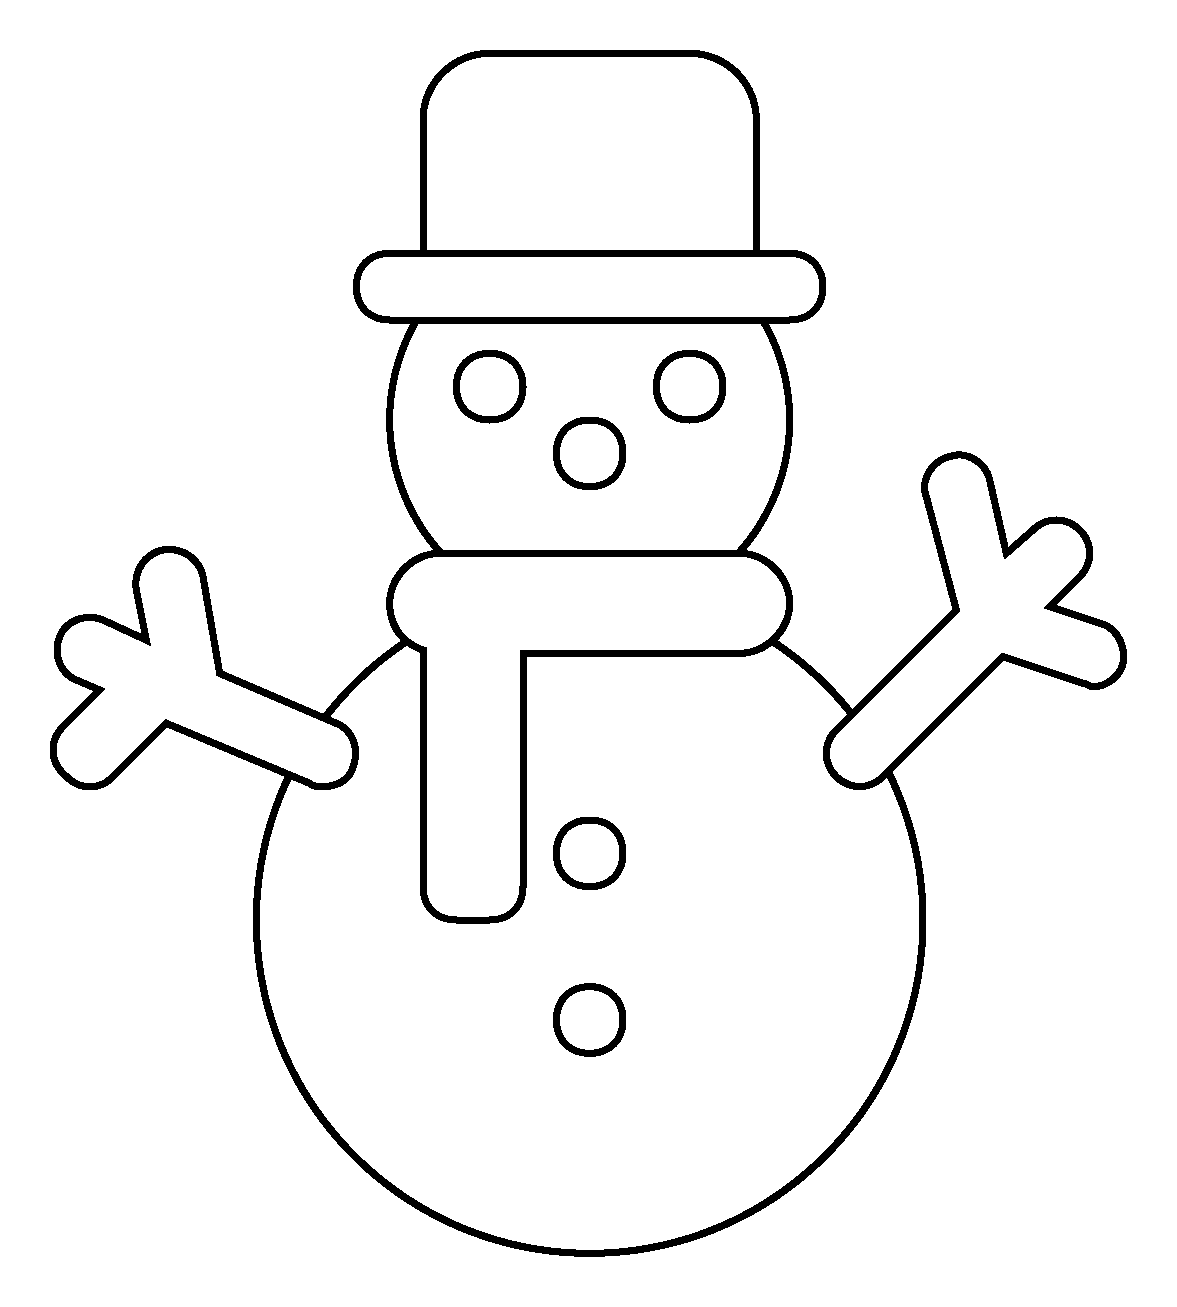 Snowman Without Snow Emoji coloring page - ColouringPages